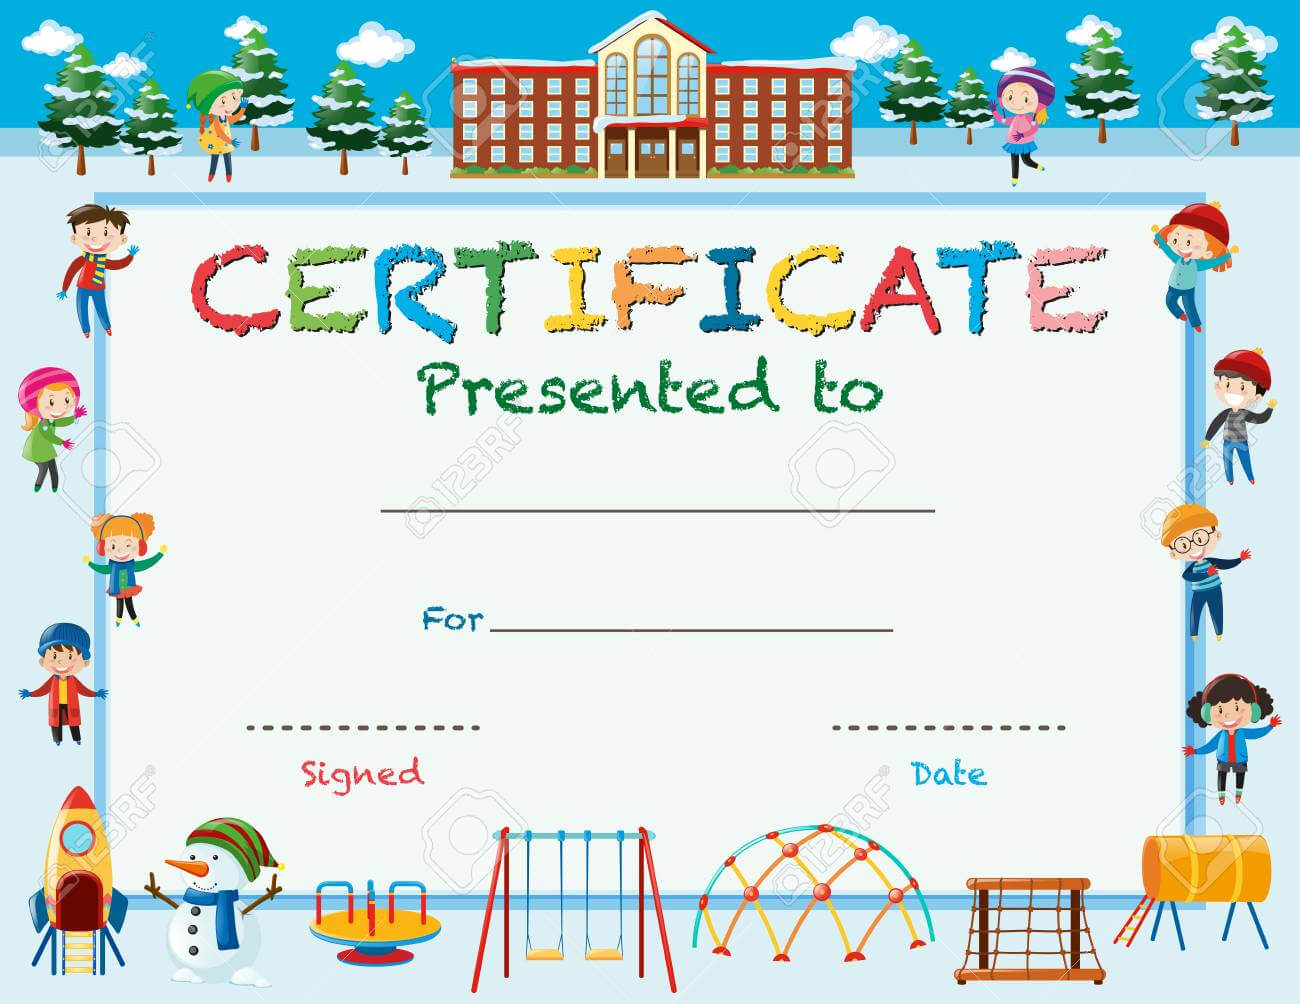 certificate-template-with-kids-in-winter-at-school-illustration-in-free